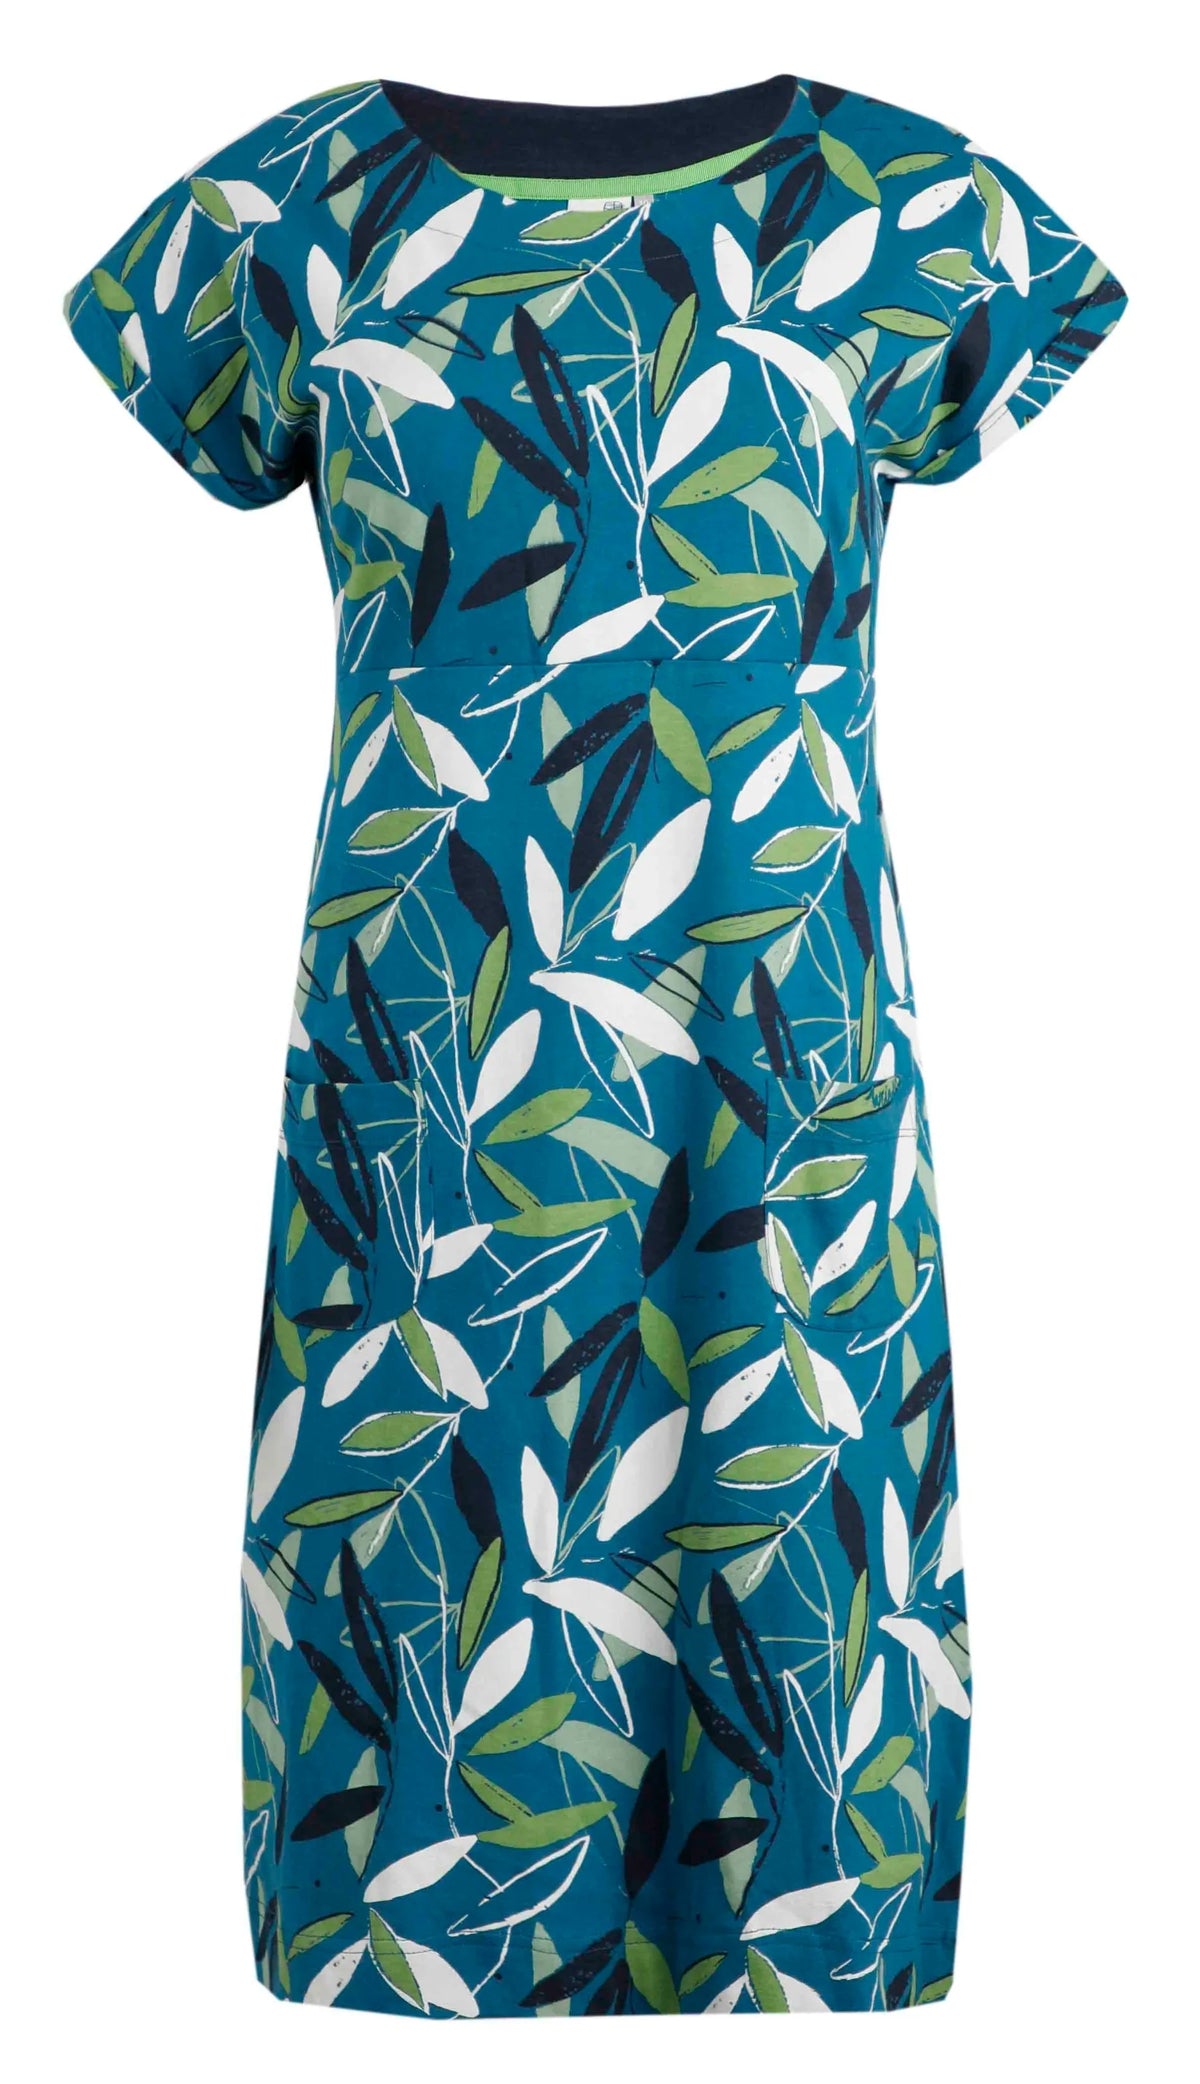 Weird Fish women's Tallahassee priinted jersey dress in Deep Sea Blue with floral leaf print.